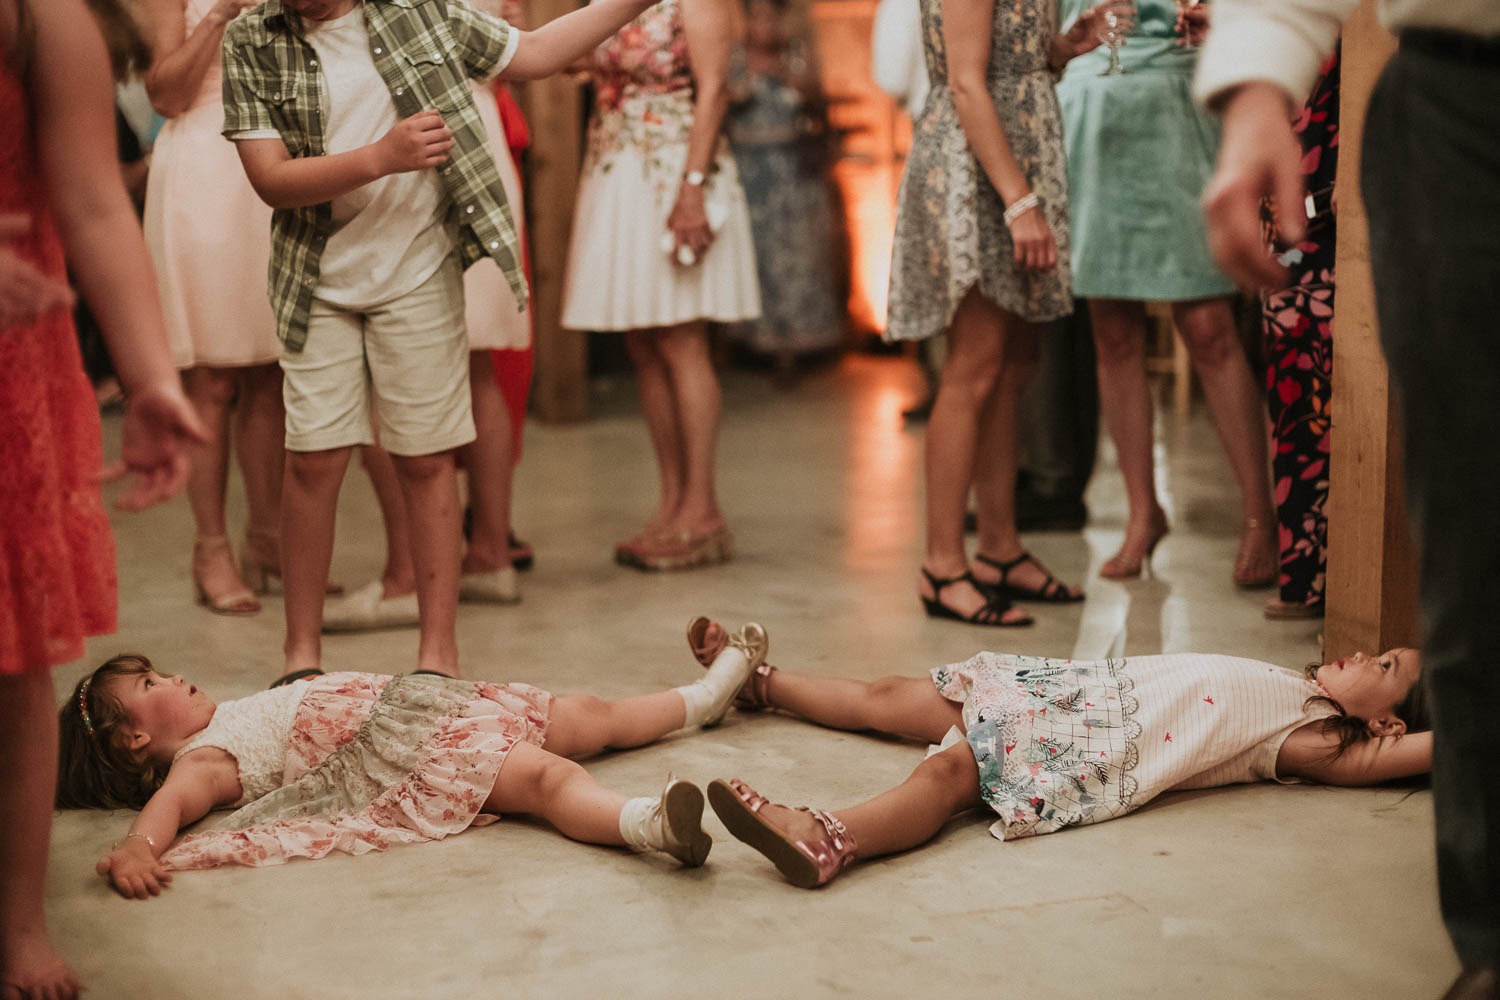 Kids are kids - lying on reception floor - Bulverde Wedding Photographer Philip Thomas - Dru+Kerry-47 Kids lying on reception floor Funny antics between two girls at a wedding reception shows the young girls lying down touch feet